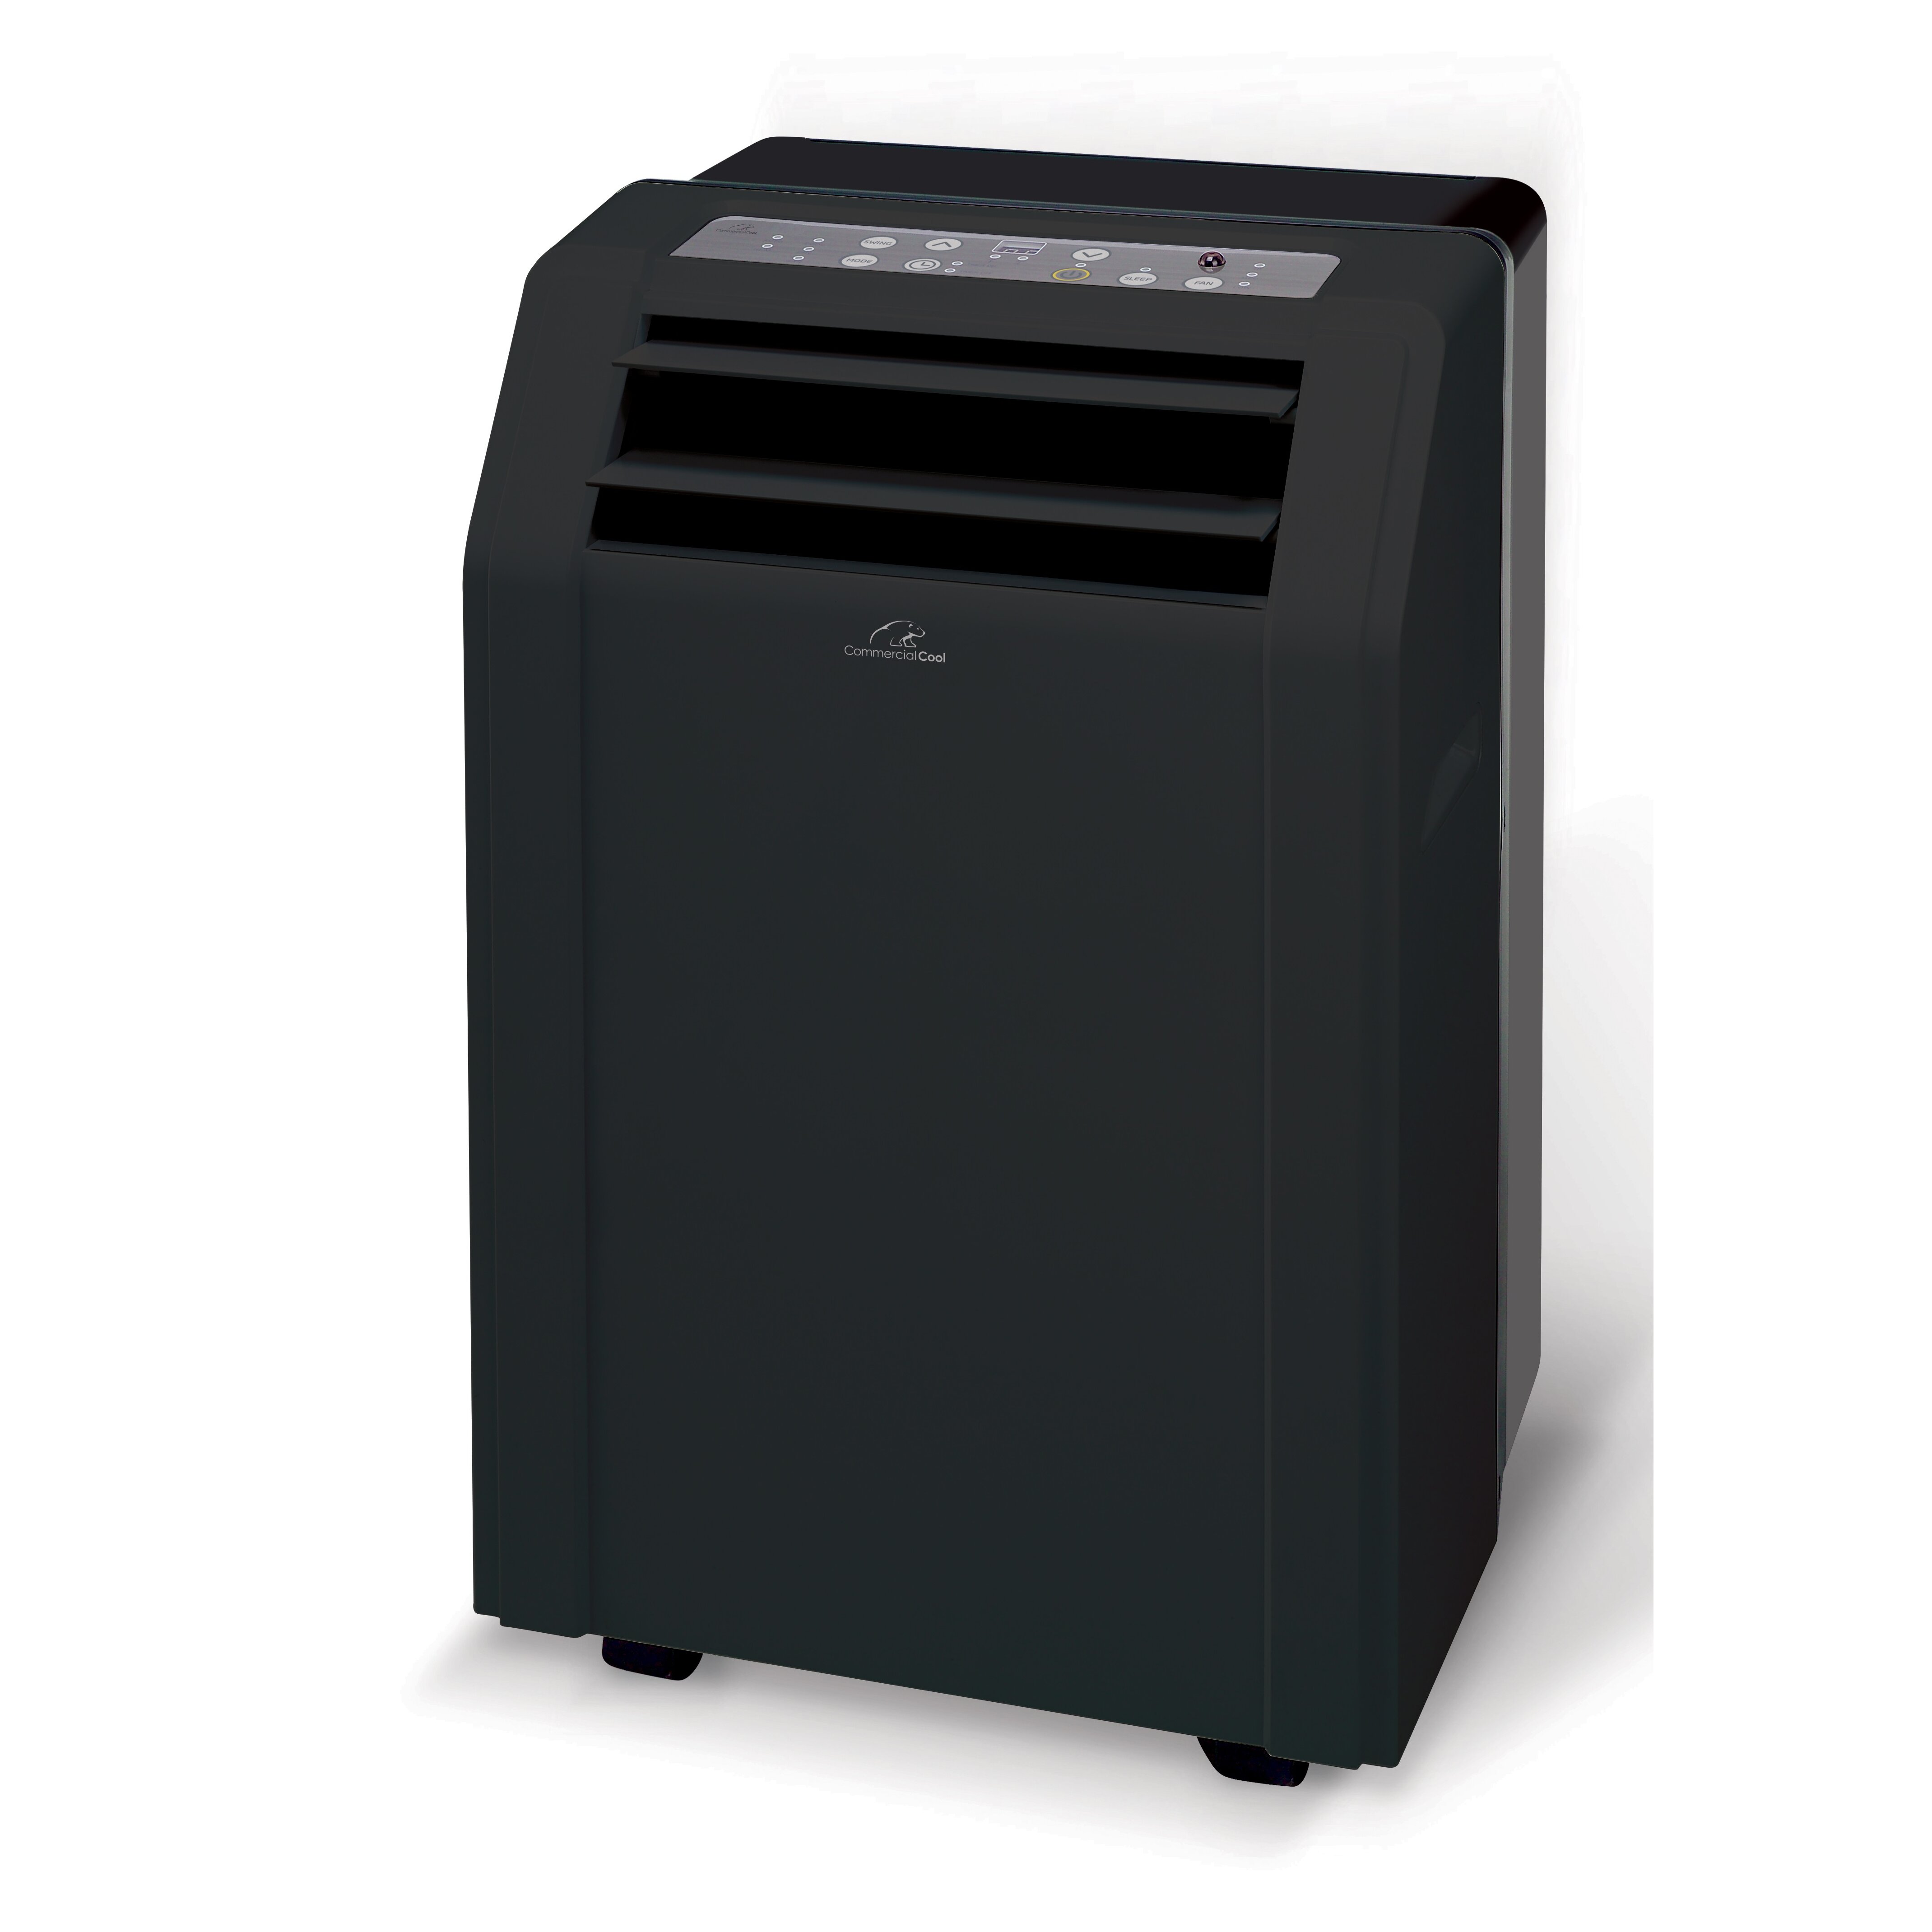 Commercial Cool 12,000 BTU Energy Star Portable Air Conditioner with Remote & Reviews Wayfair.ca